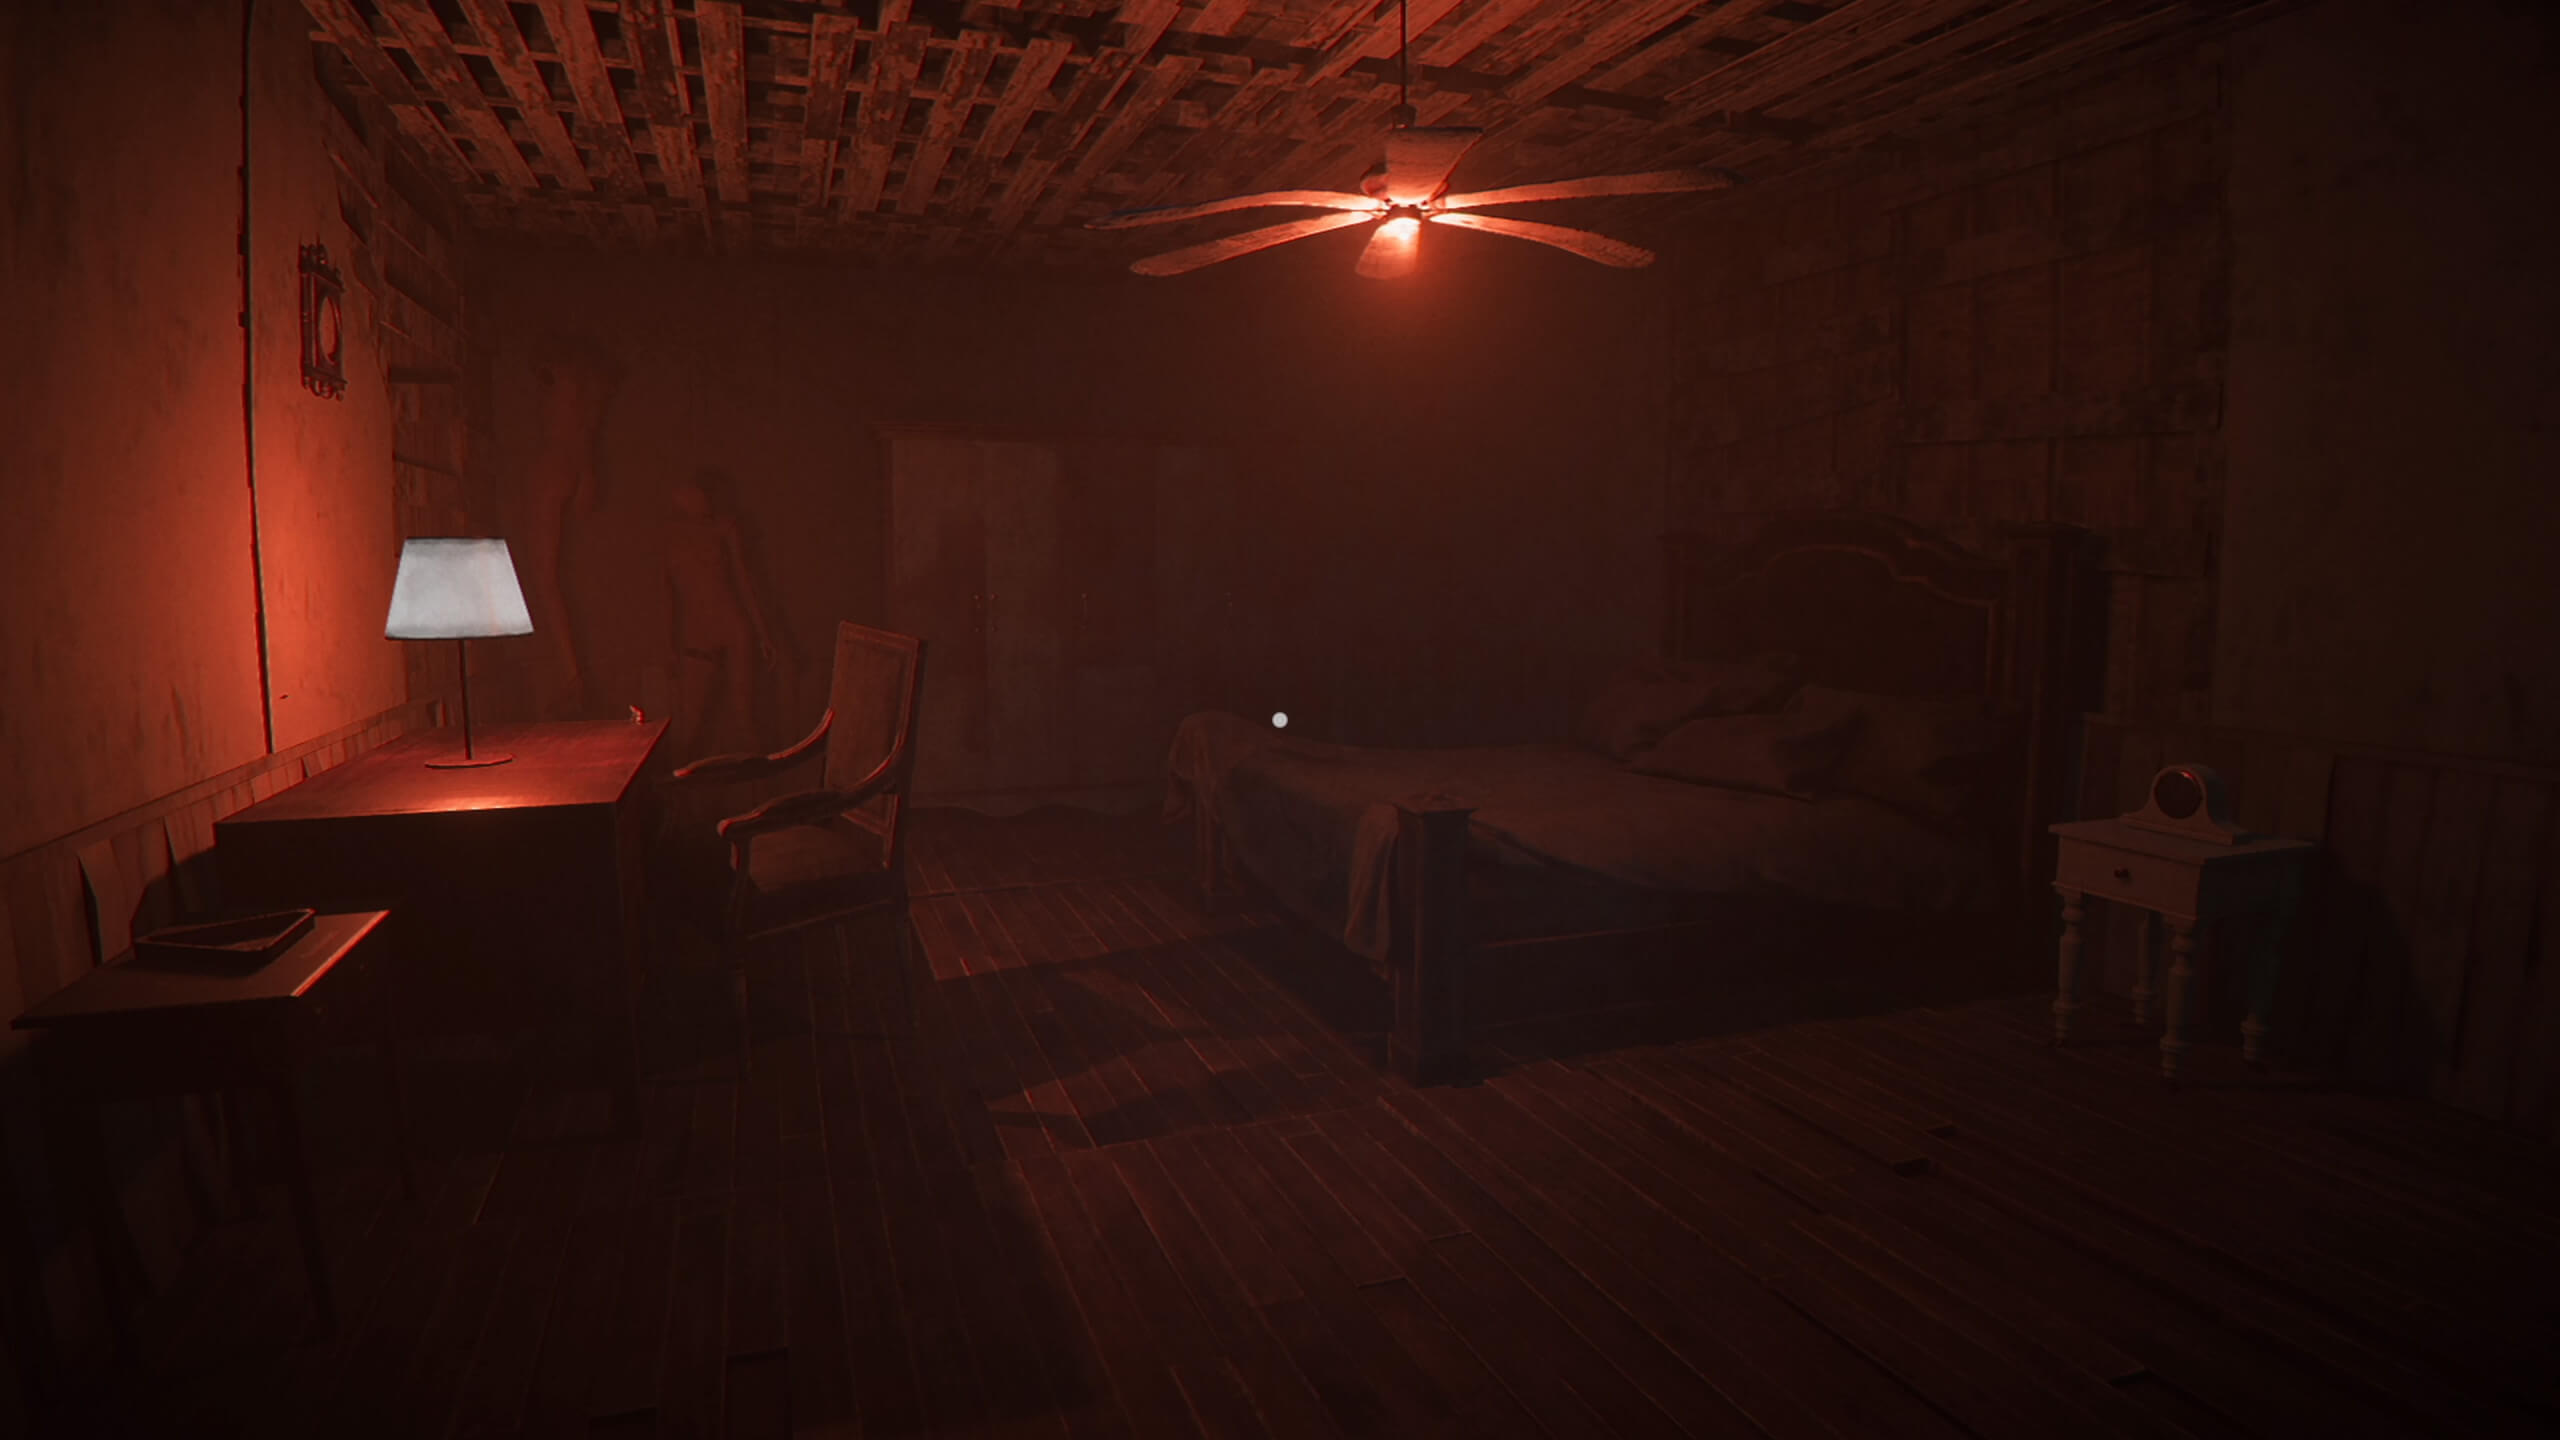 A dimly lit, dilapidated red tinted room. On the left is a table with a lamp on it. On the right is a double bed, and on the left against the wall are two mannequins.